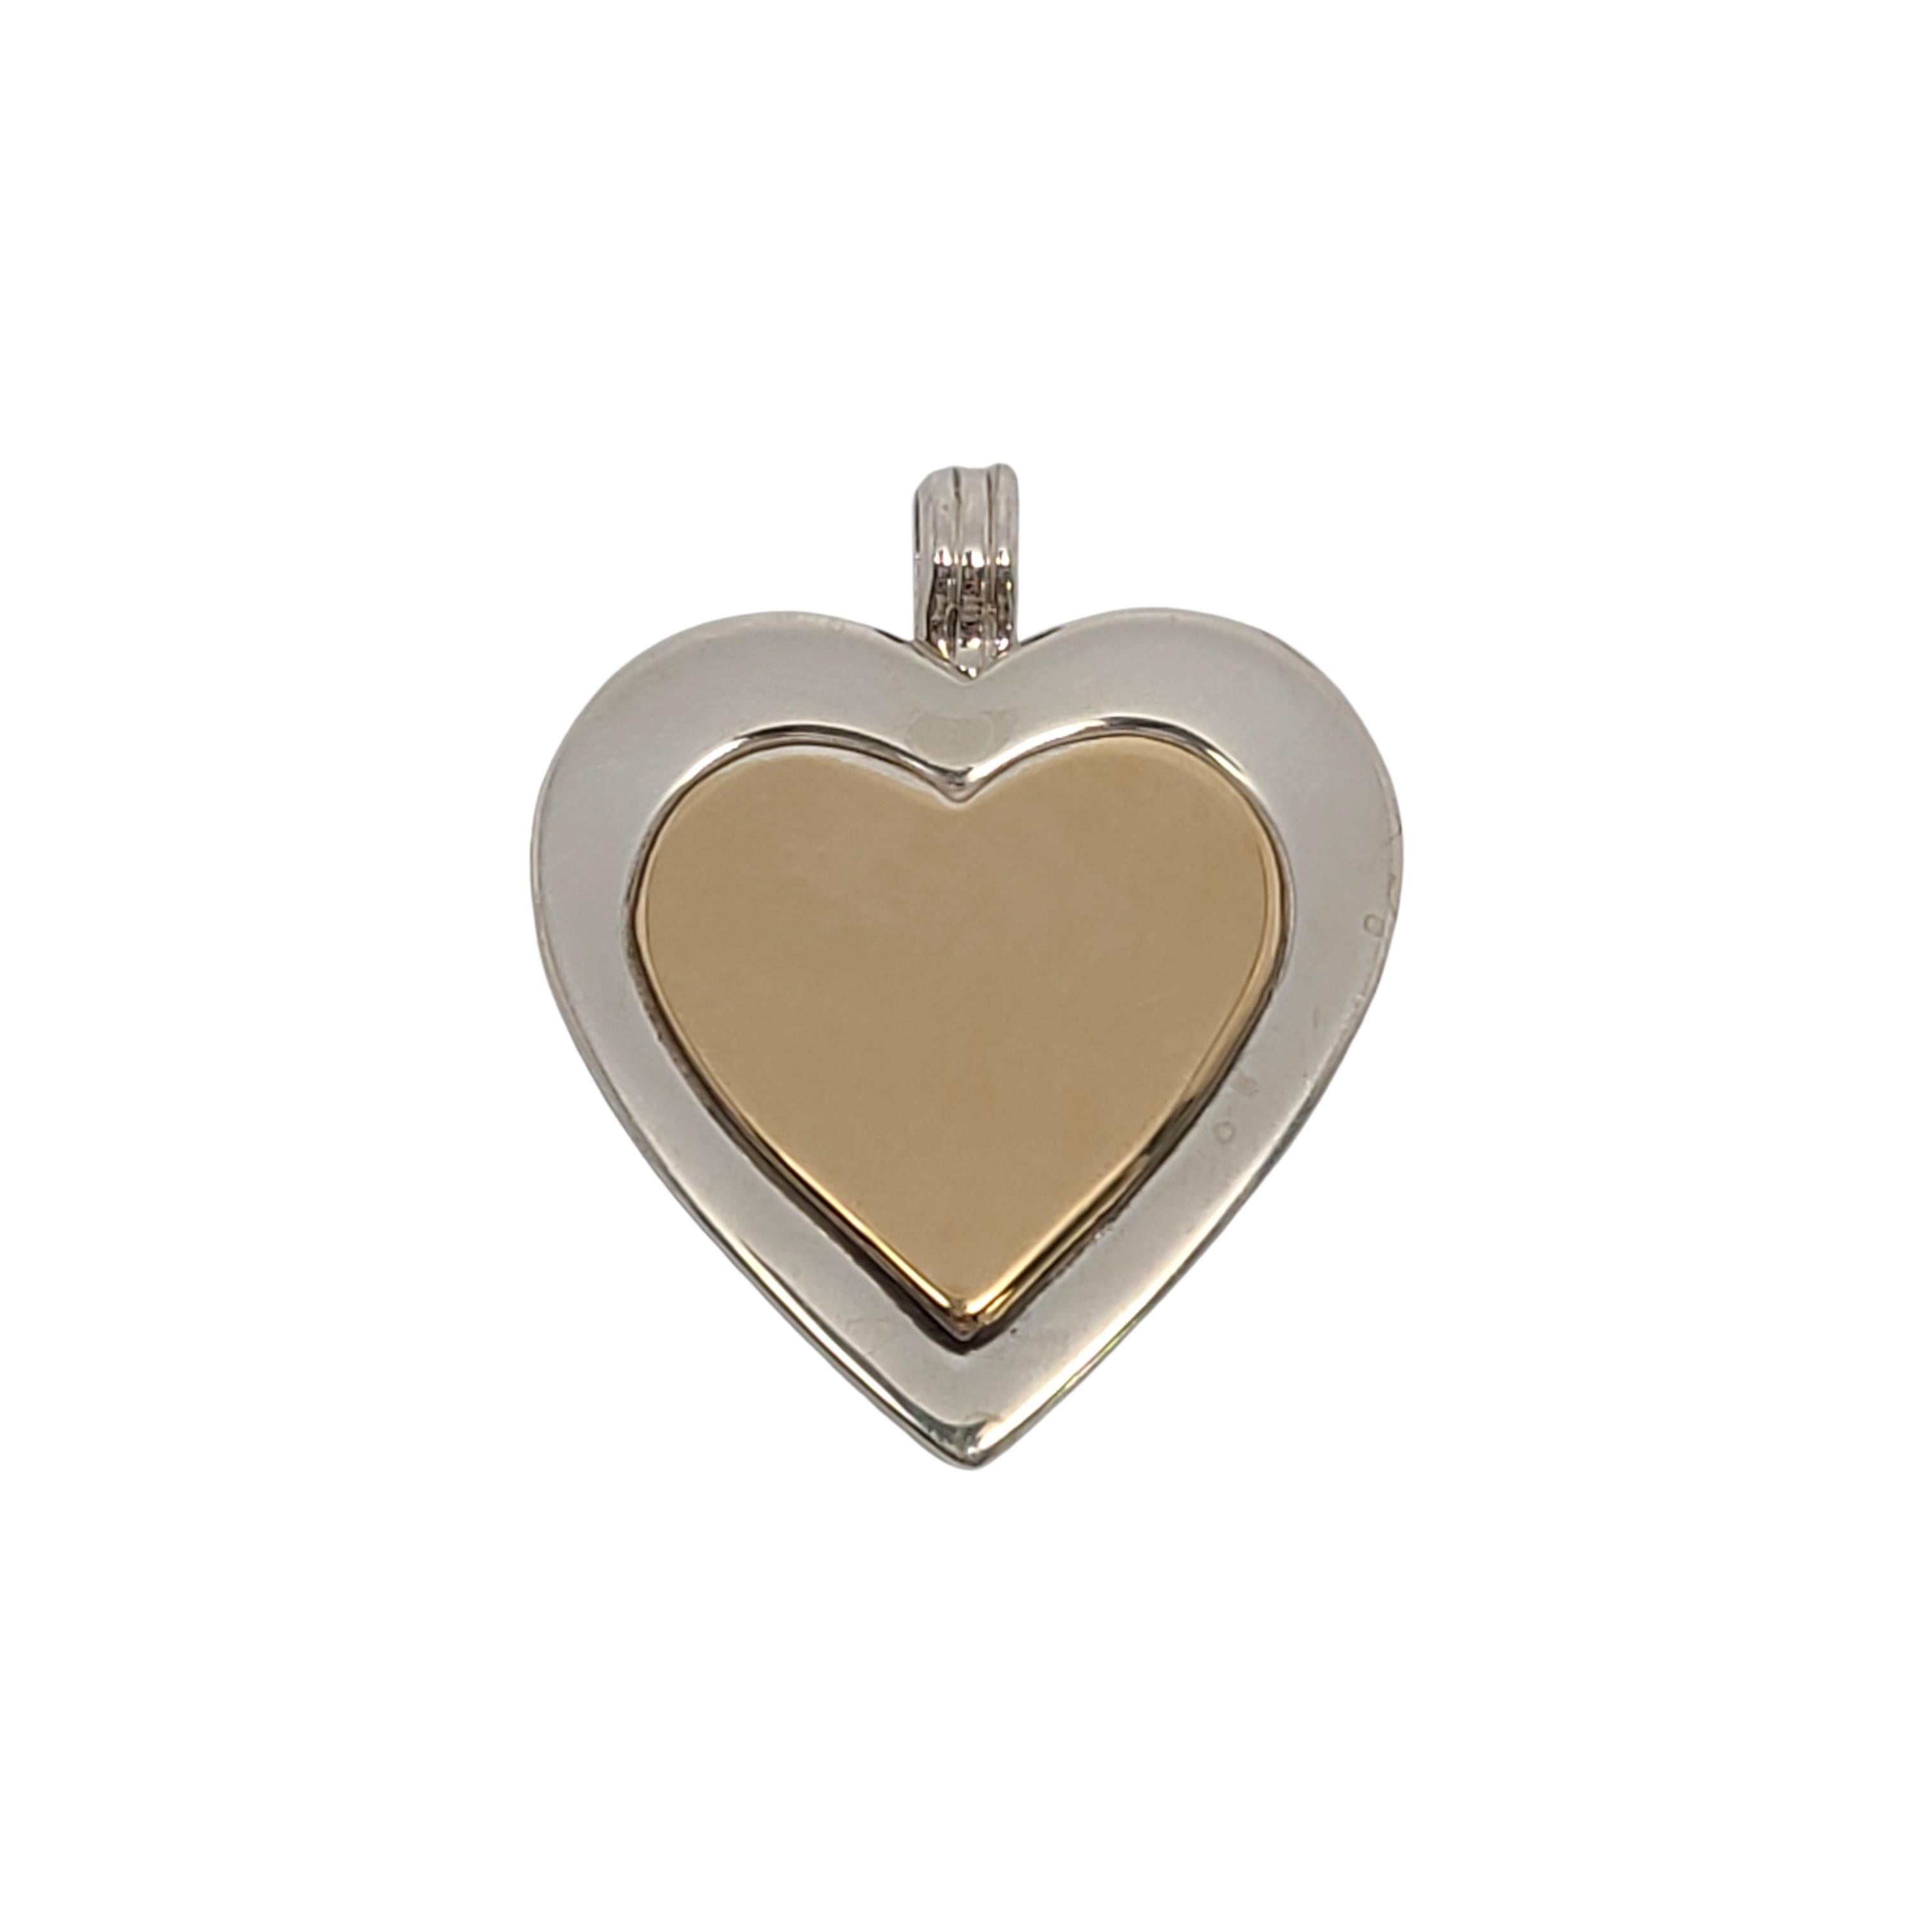 Tiffany & Co sterling silver and gold plated heart pendant.

Authentic Tiffany sterling silver heart pendant with 18K yellow gold over sterling silver inner heart. Includes Tiffany & Co pouch.

Measures approx 1 1/4